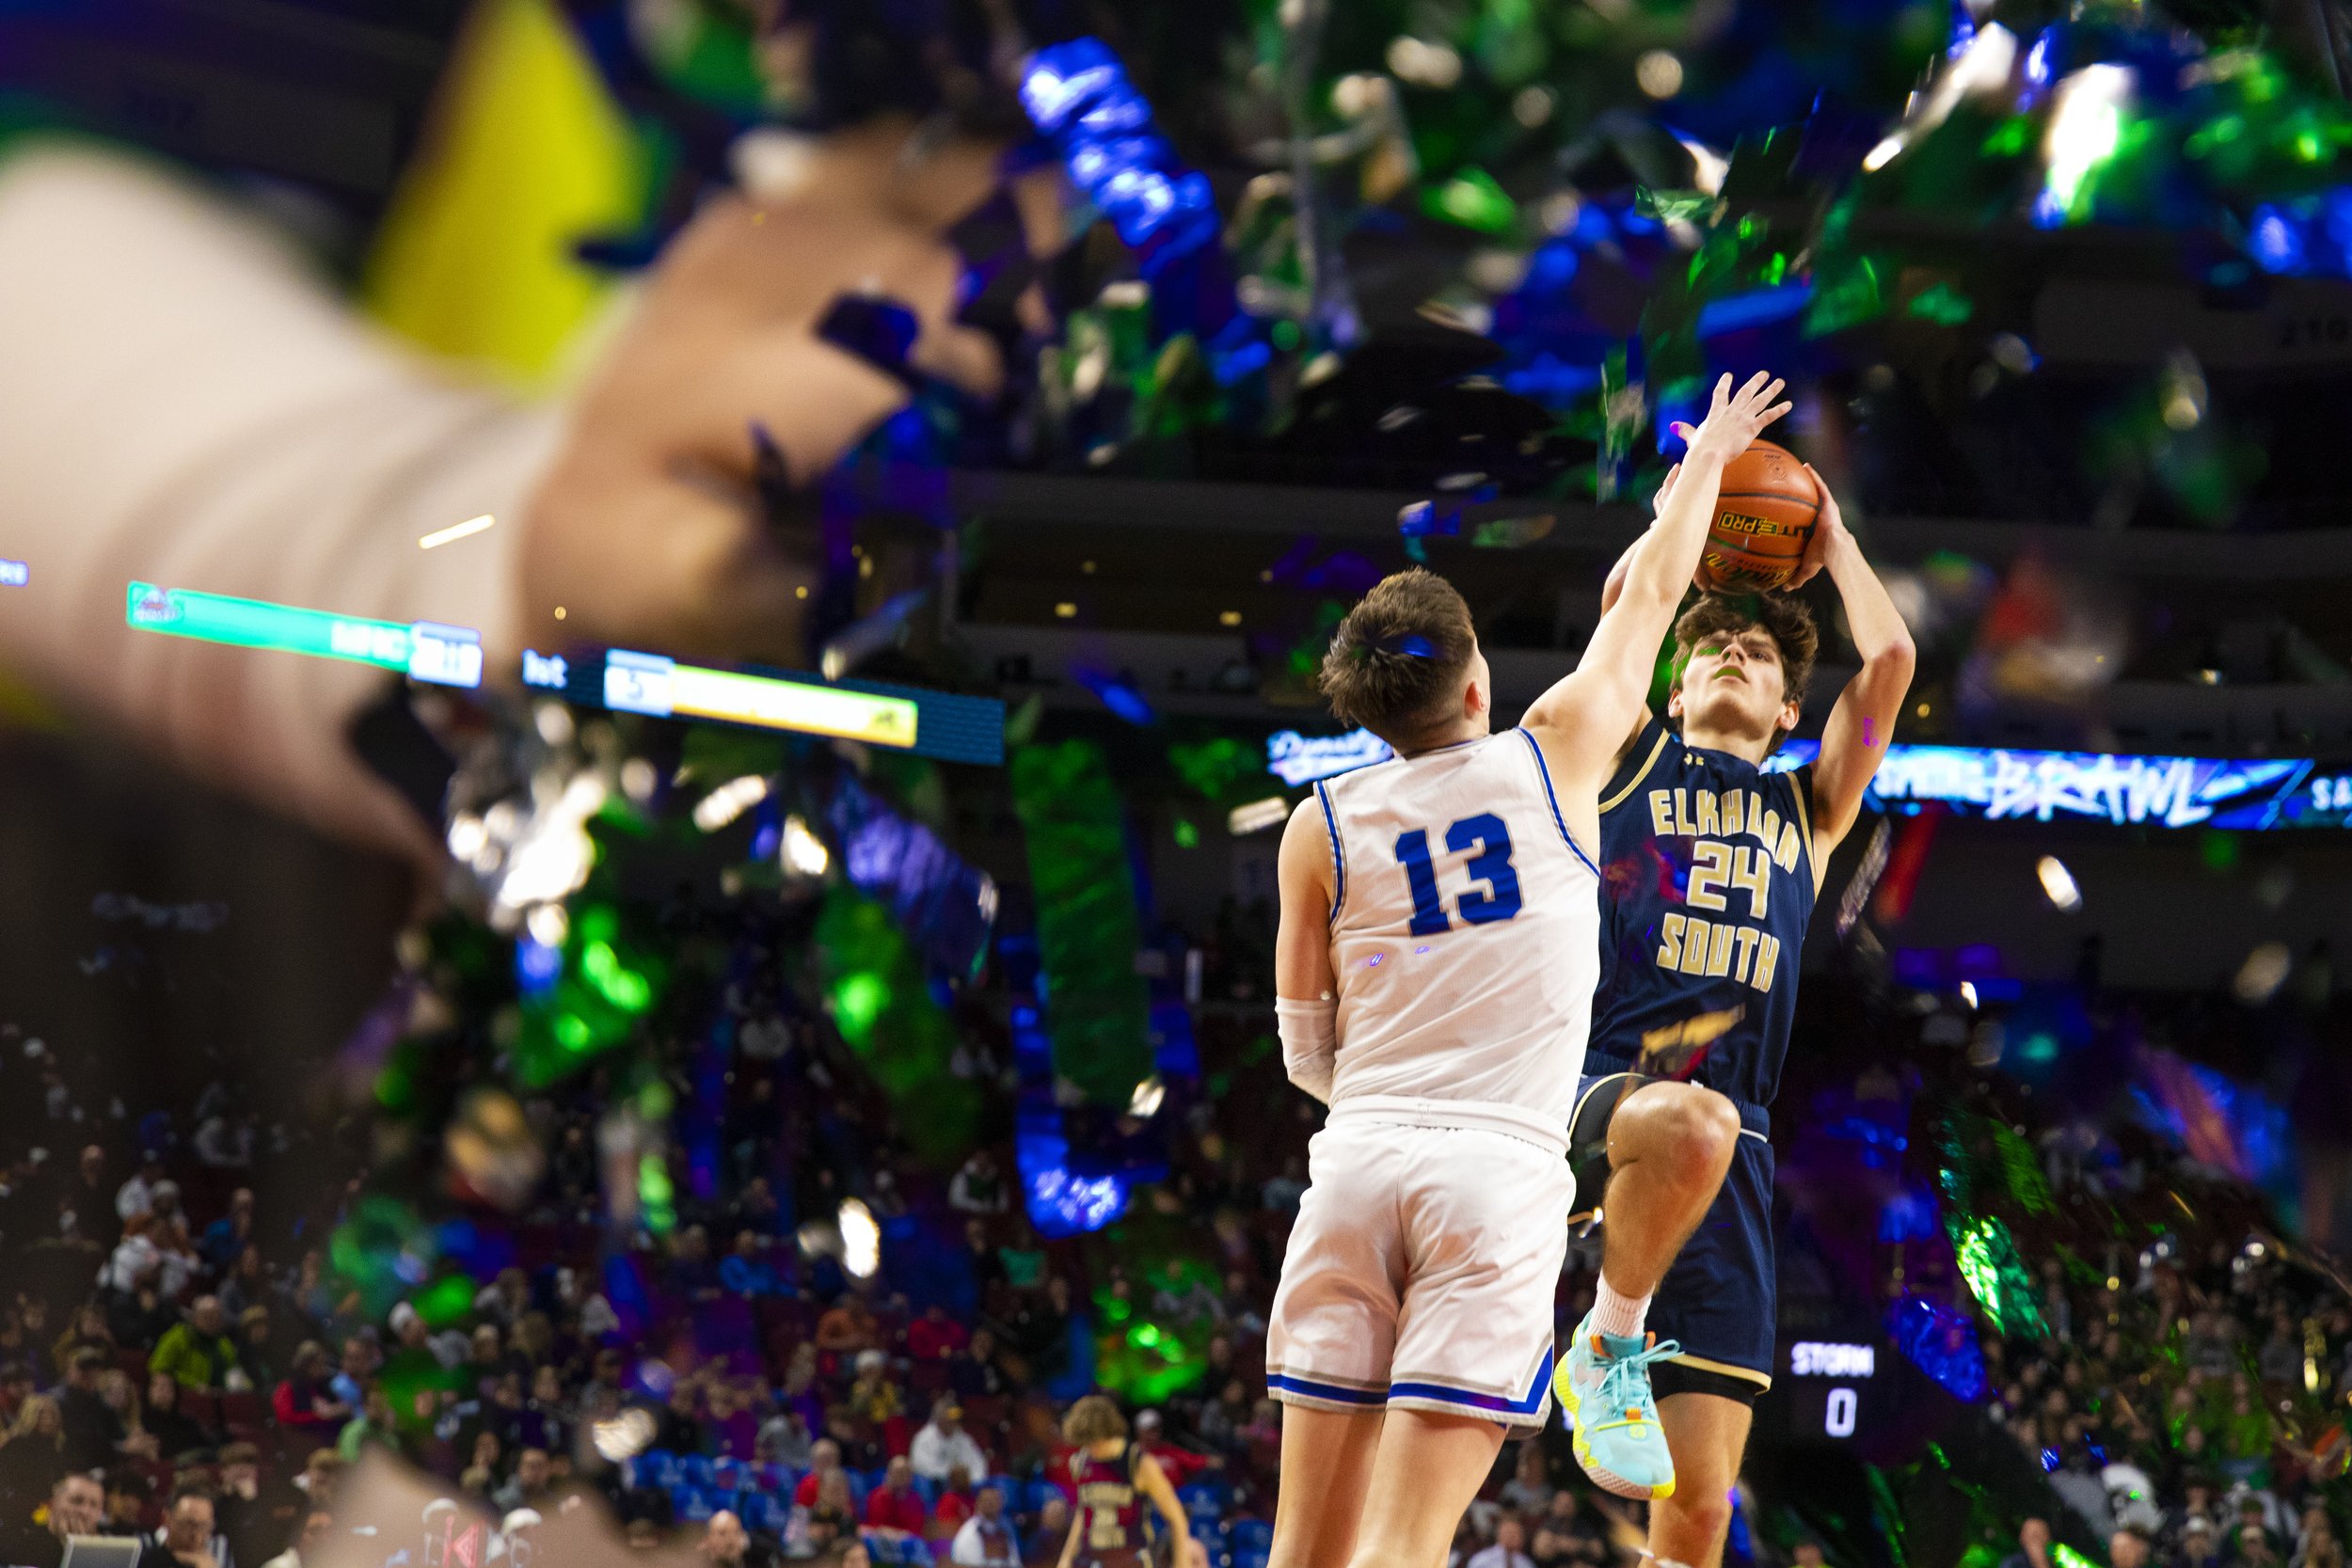  Using an in camera double exposure, A cheerleaders pom-pom is used to frame Millard North's Neal Mosser as he blocks a layup attempt by Elkhorn South's Evan Werner during a Class A state tournament game Wednesday, March 8, 2023, at Pinnacle Bank Are